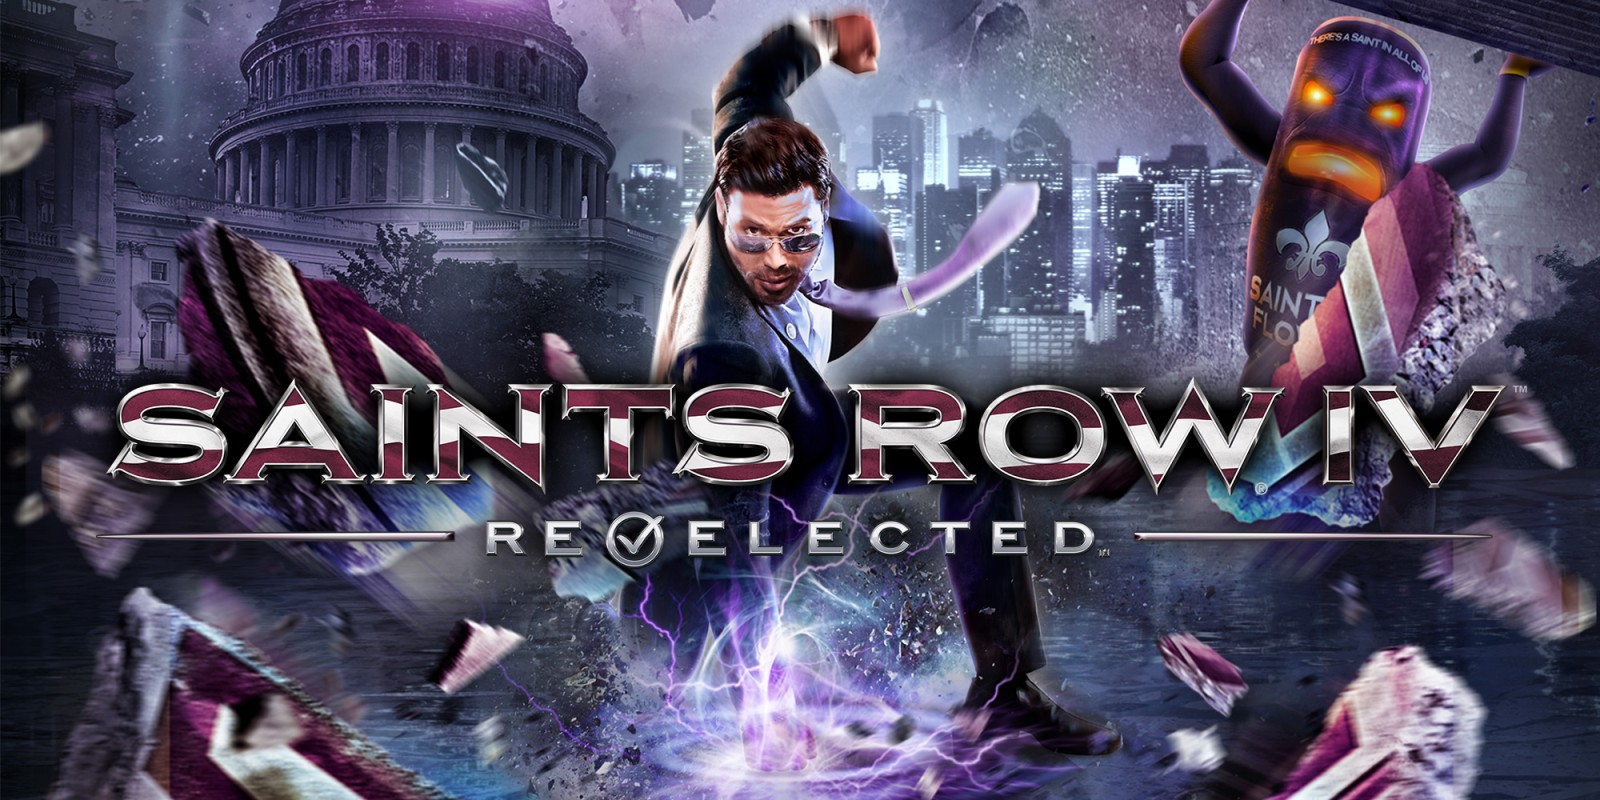 Saints Row IV Re-Elected Review (Switch)